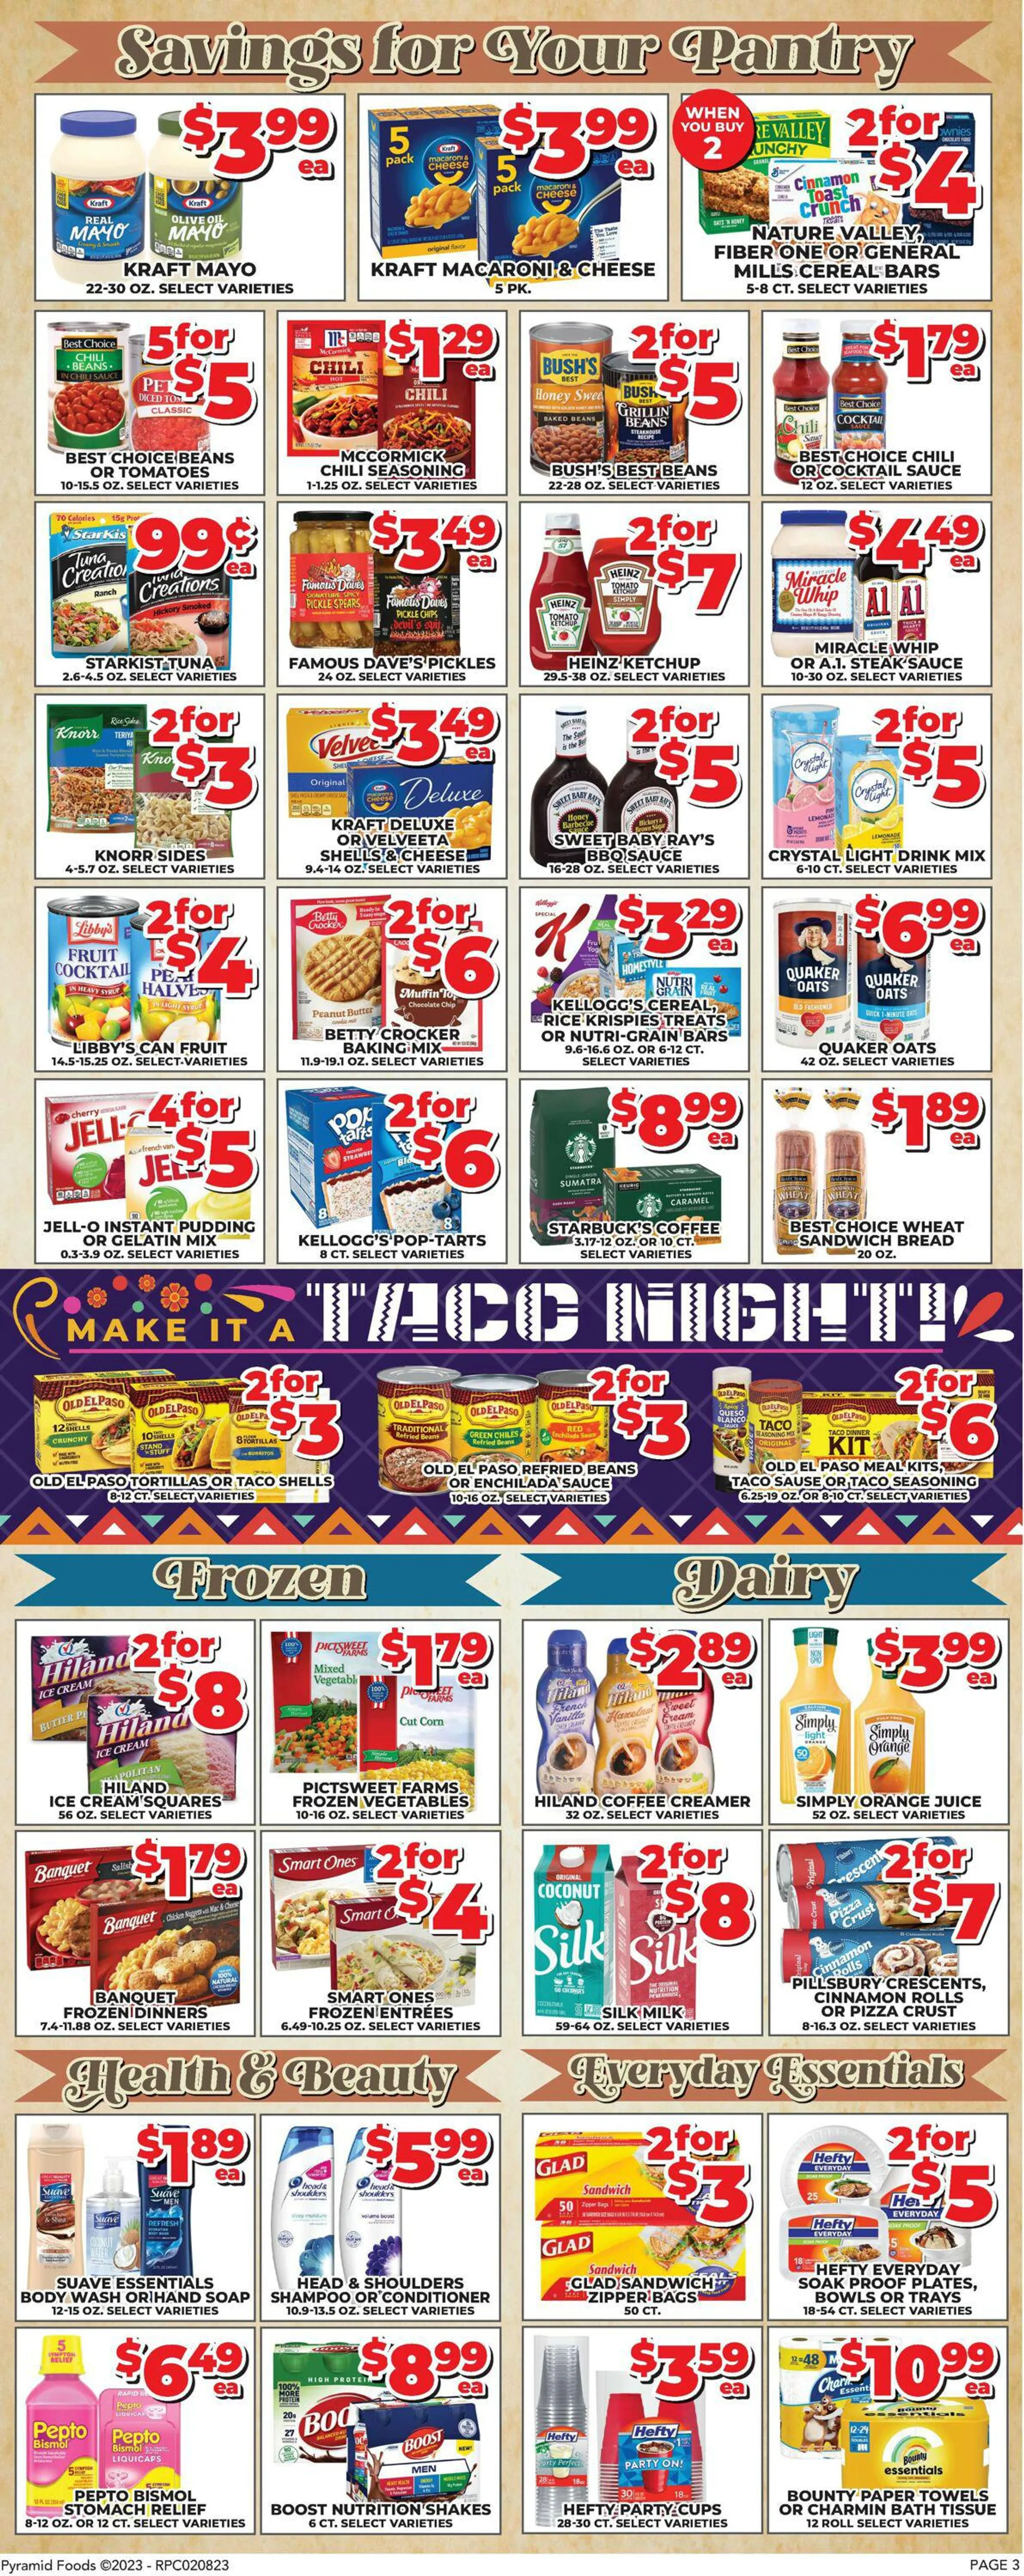 Price Cutter Current weekly ad - 5